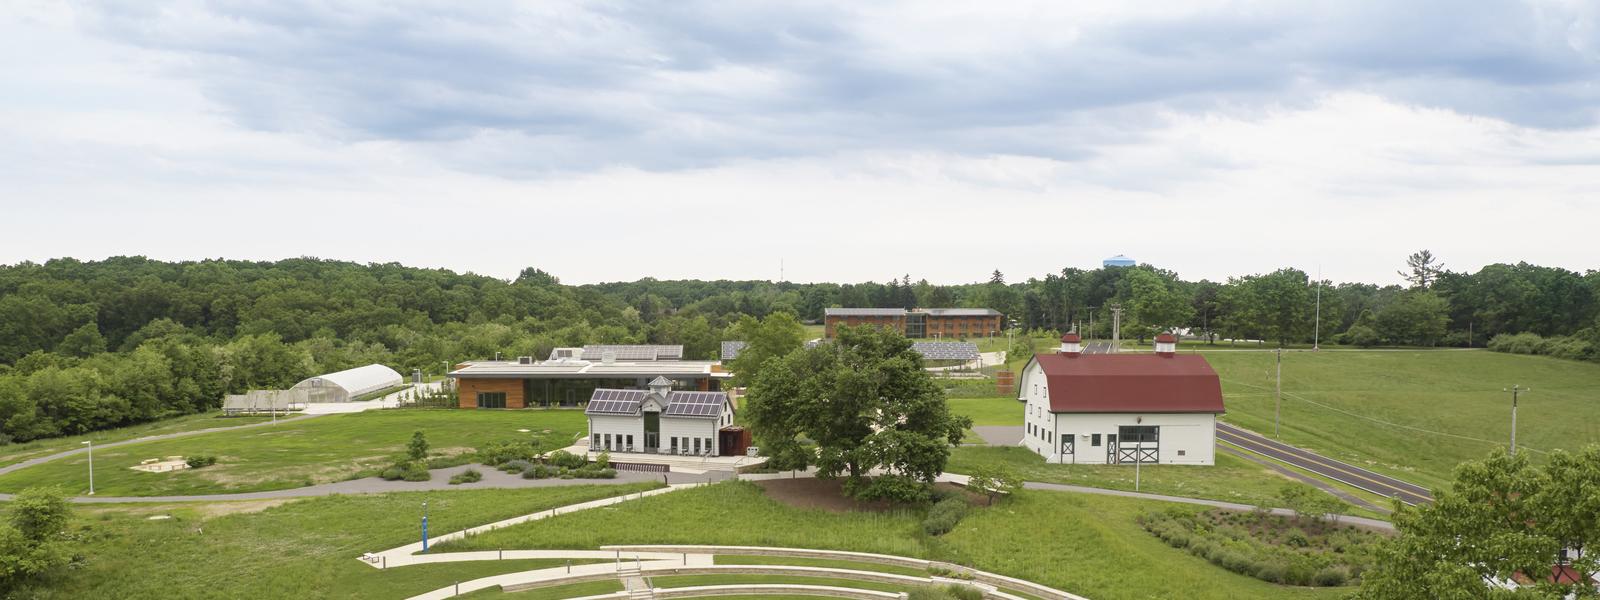 Aerial photo of Chatham University's Eden Hall Farm campus featuring the dairy barn, Eden Hall Commons, walking paths and fields. 